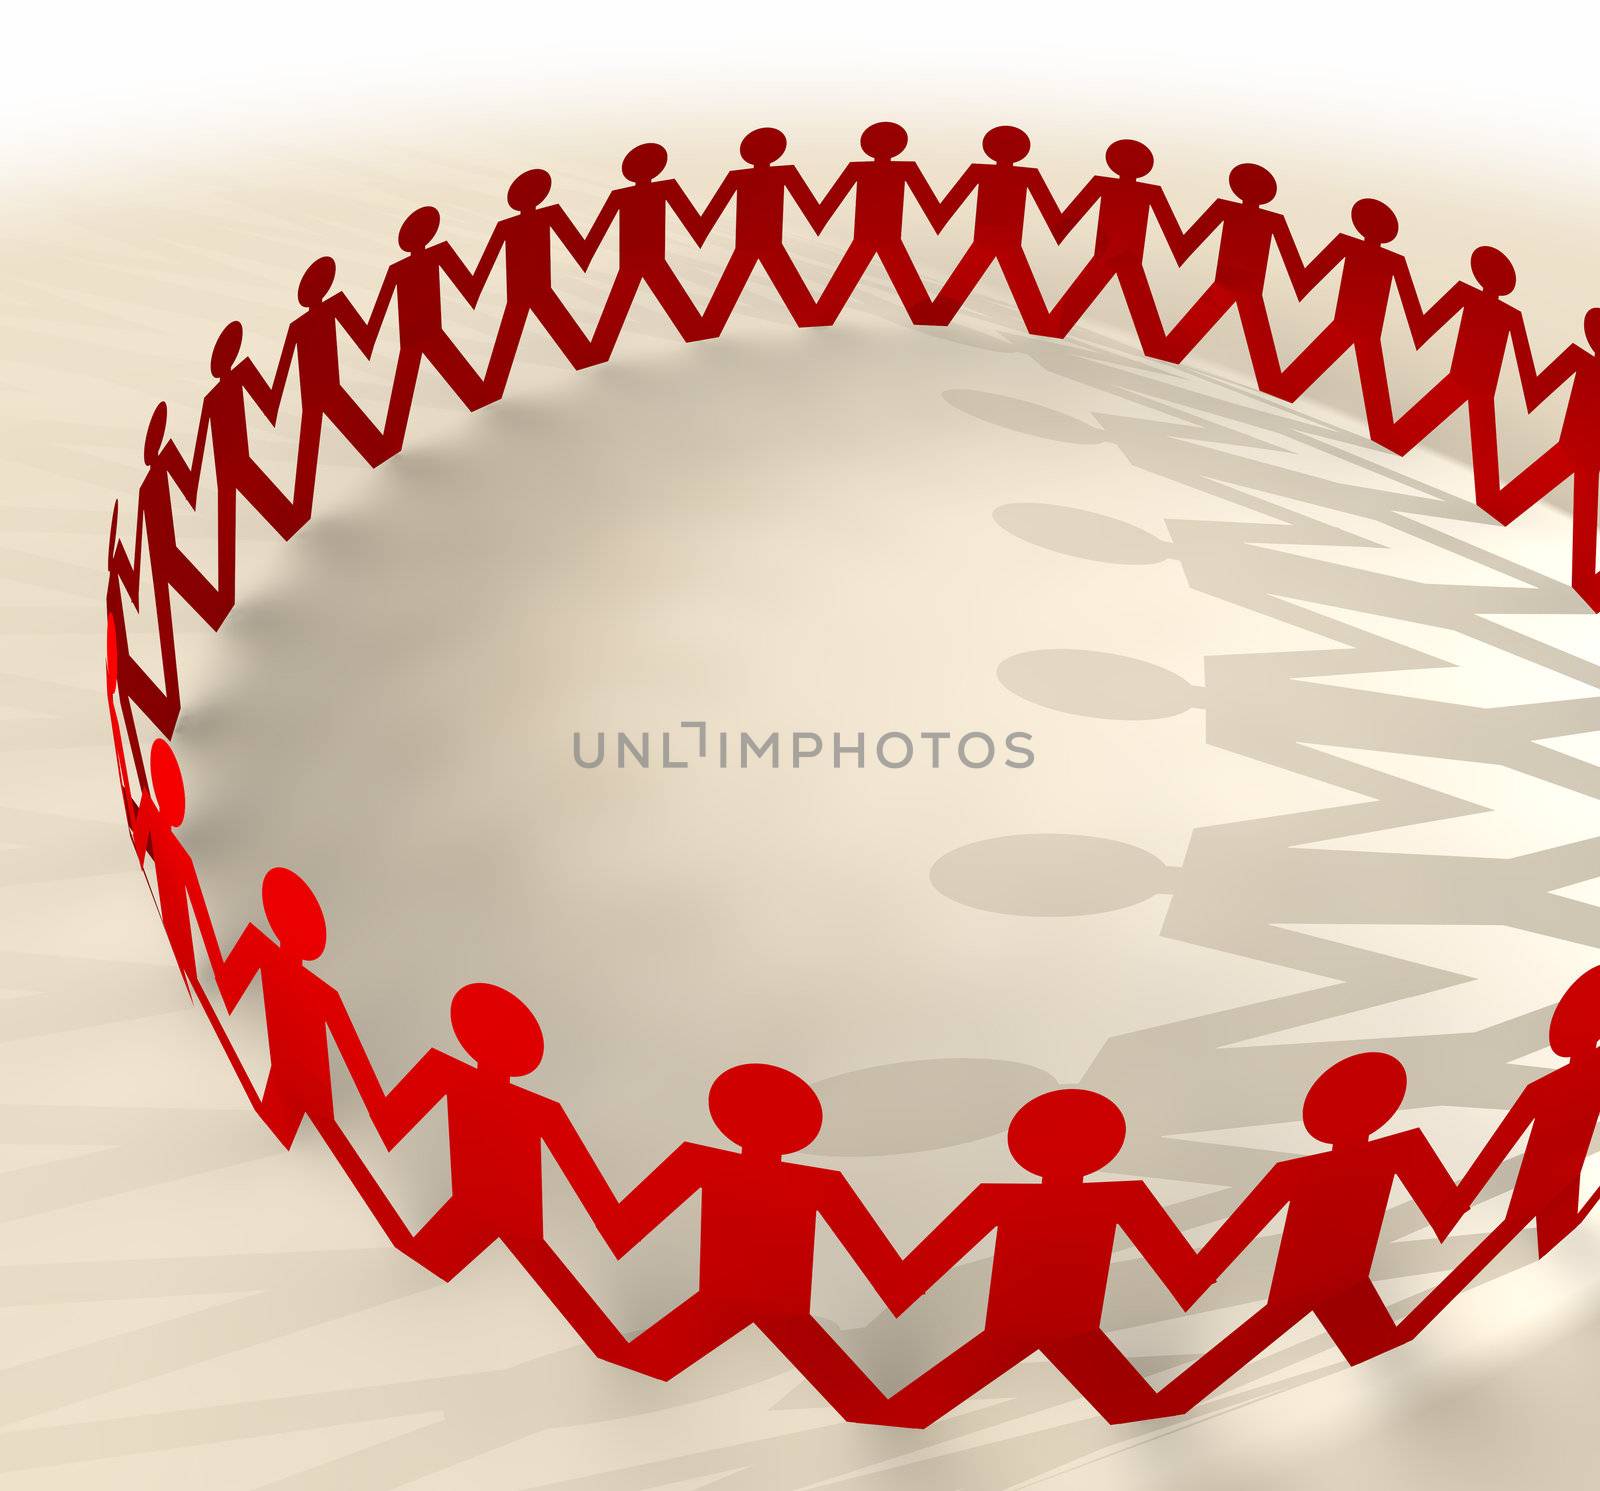 Red paper chain men holding hands in a ring concept with shadows